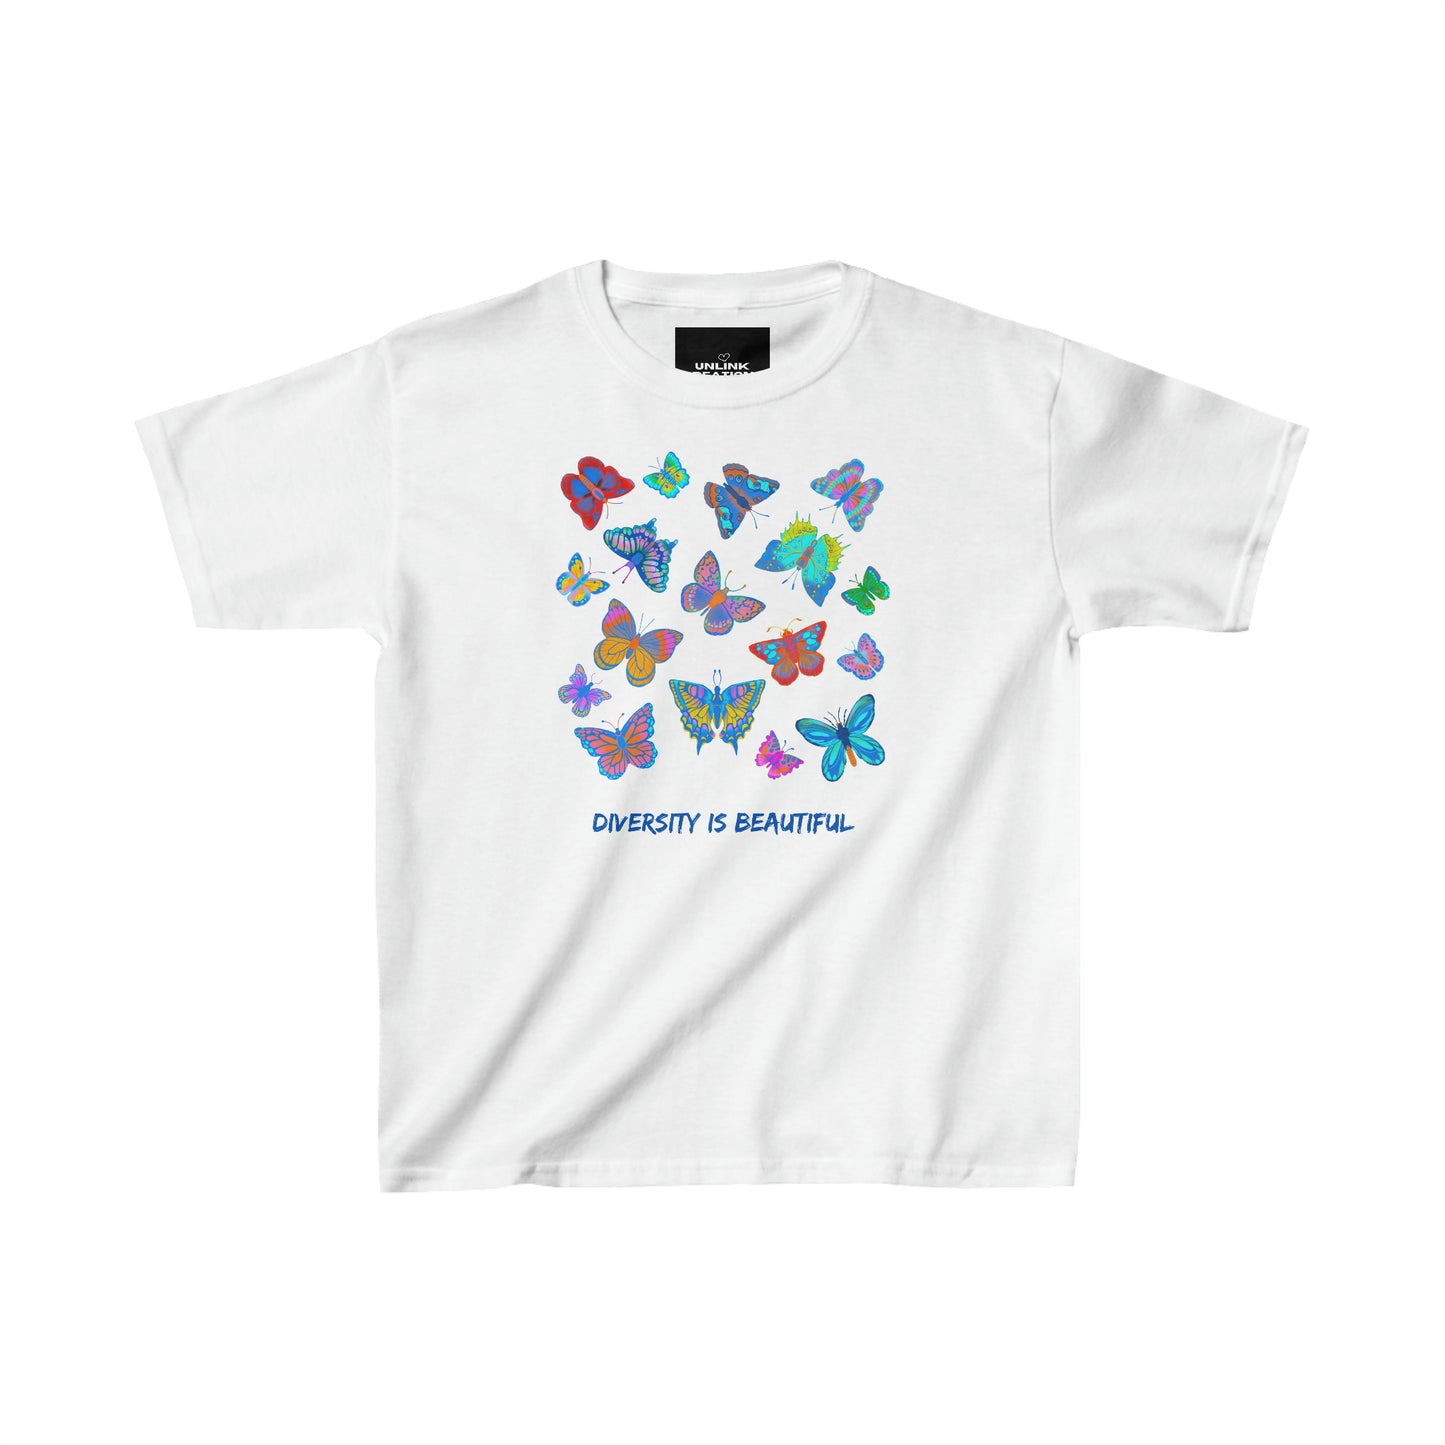 Lovely butterflies above “diversity is beautiful” message on this Kids Heavy Cotton™ Tee